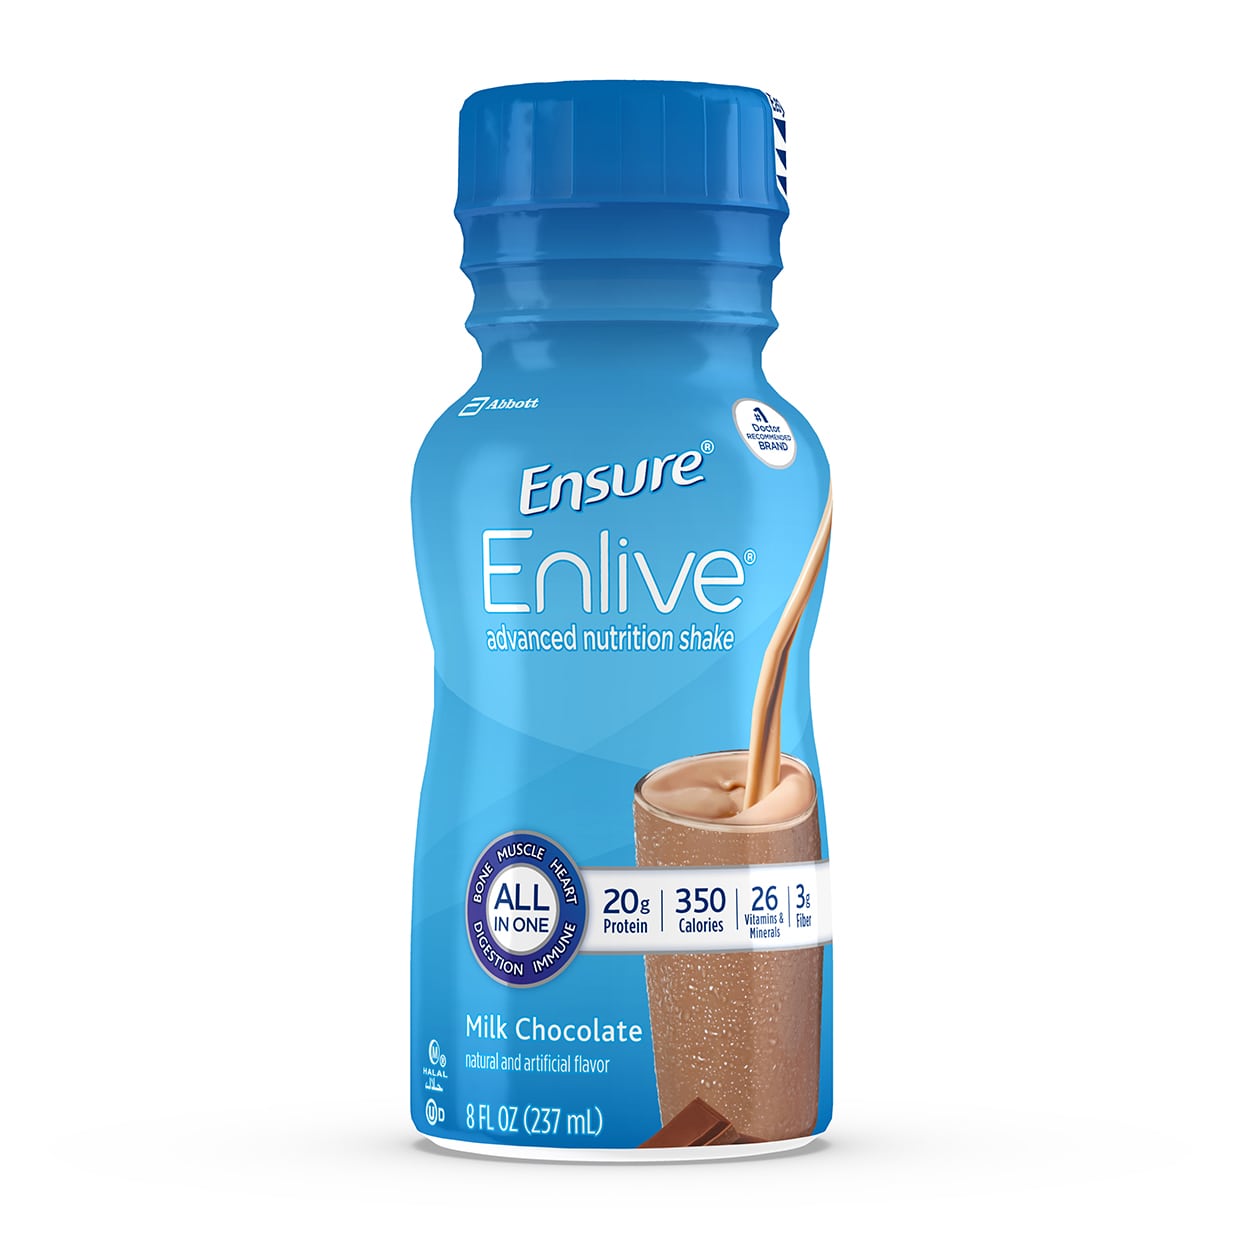 Ensure Enlive Chocolate FLavor 8 oz. Oral Supplement Bottle Ready to Use